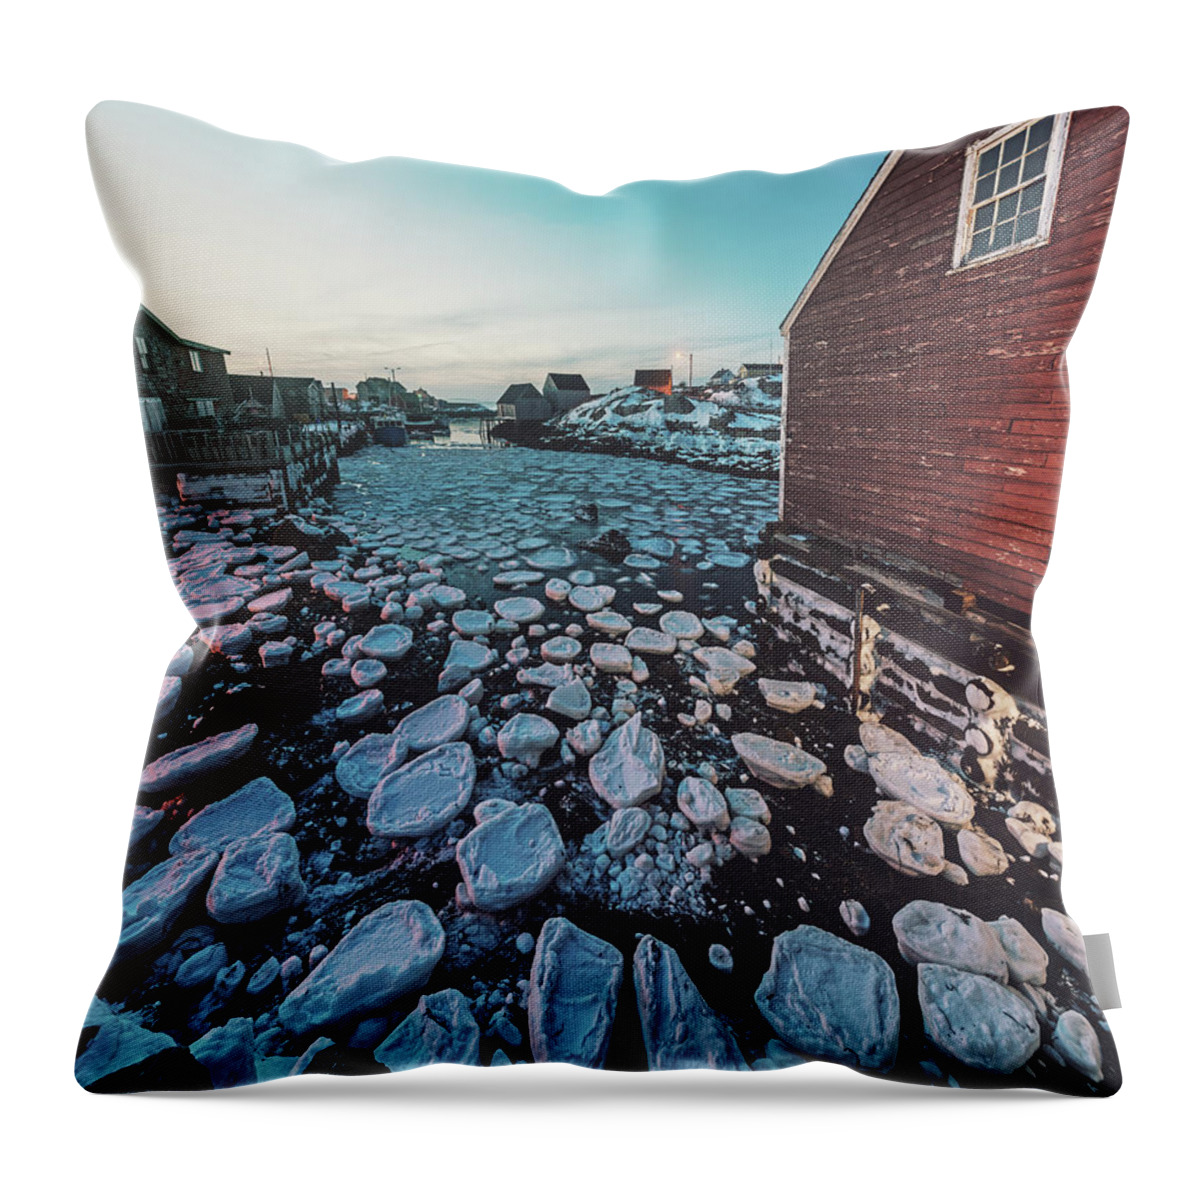 Scenics Throw Pillow featuring the photograph Cove In Ice by Shaunl